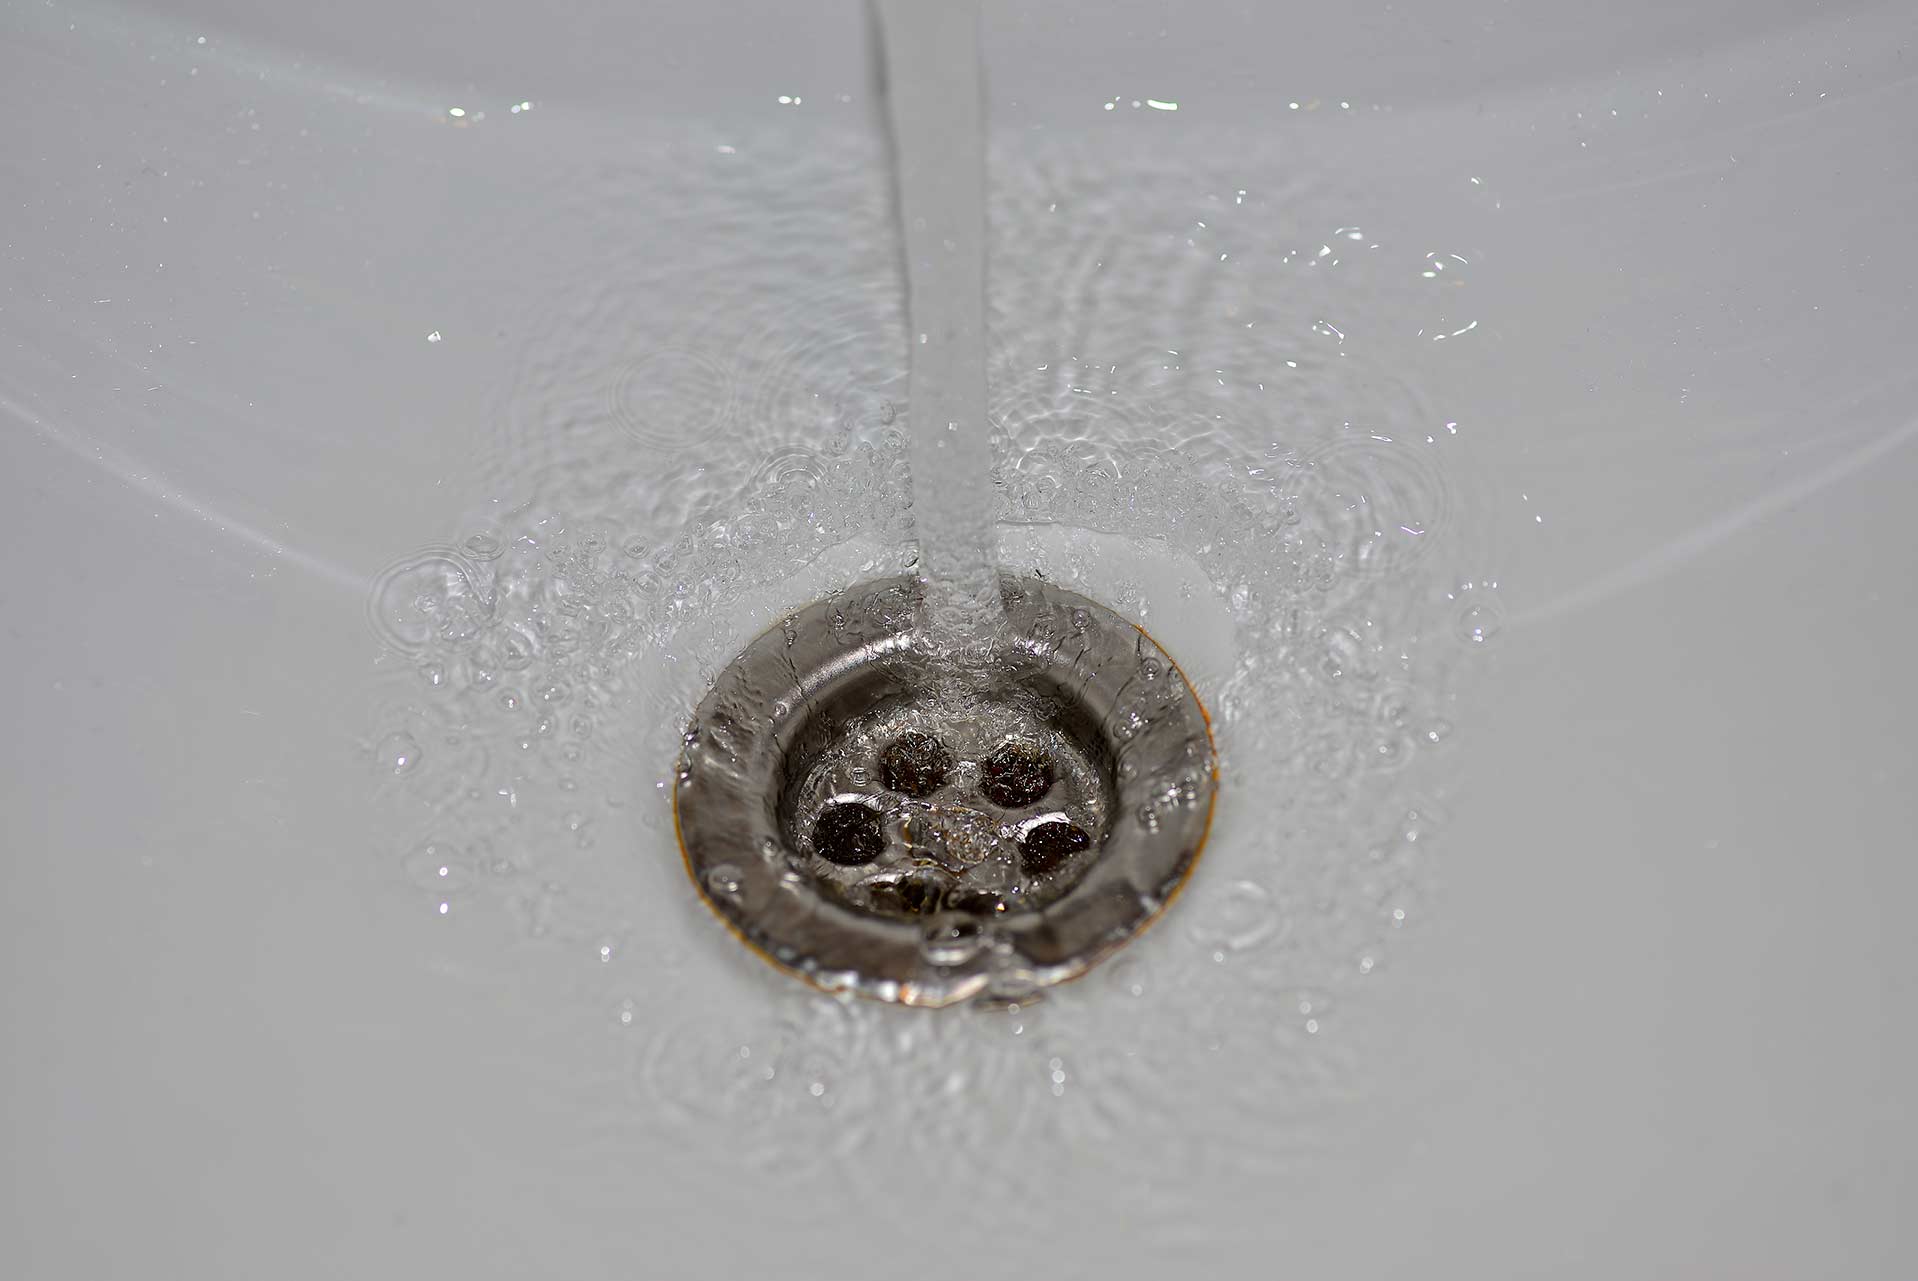 A2B Drains provides services to unblock blocked sinks and drains for properties in Chelsfield.